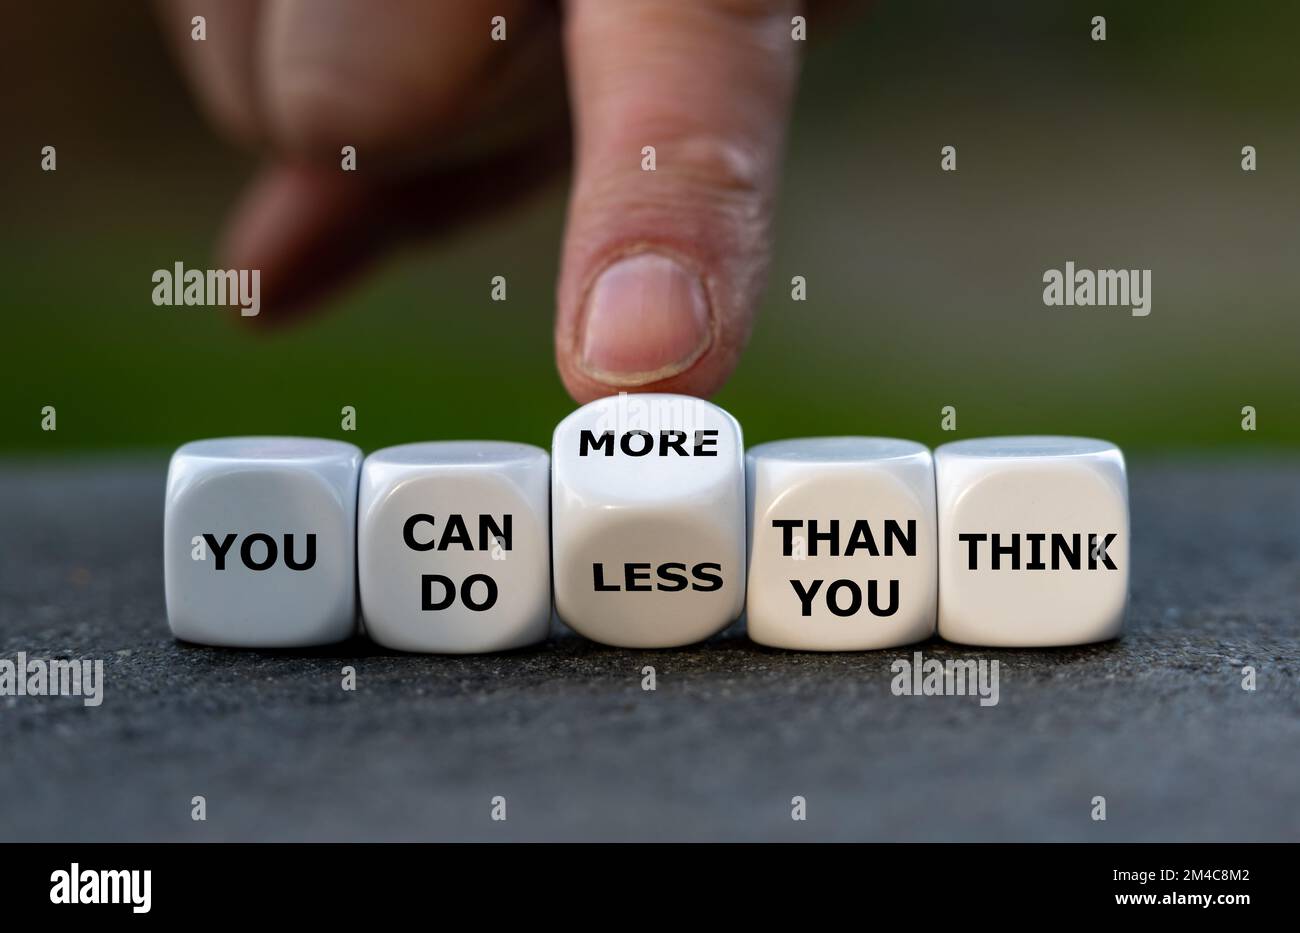 Hand turns dice and changes the expression 'you can do less than you think' to 'you can do more than you think'. Stock Photo